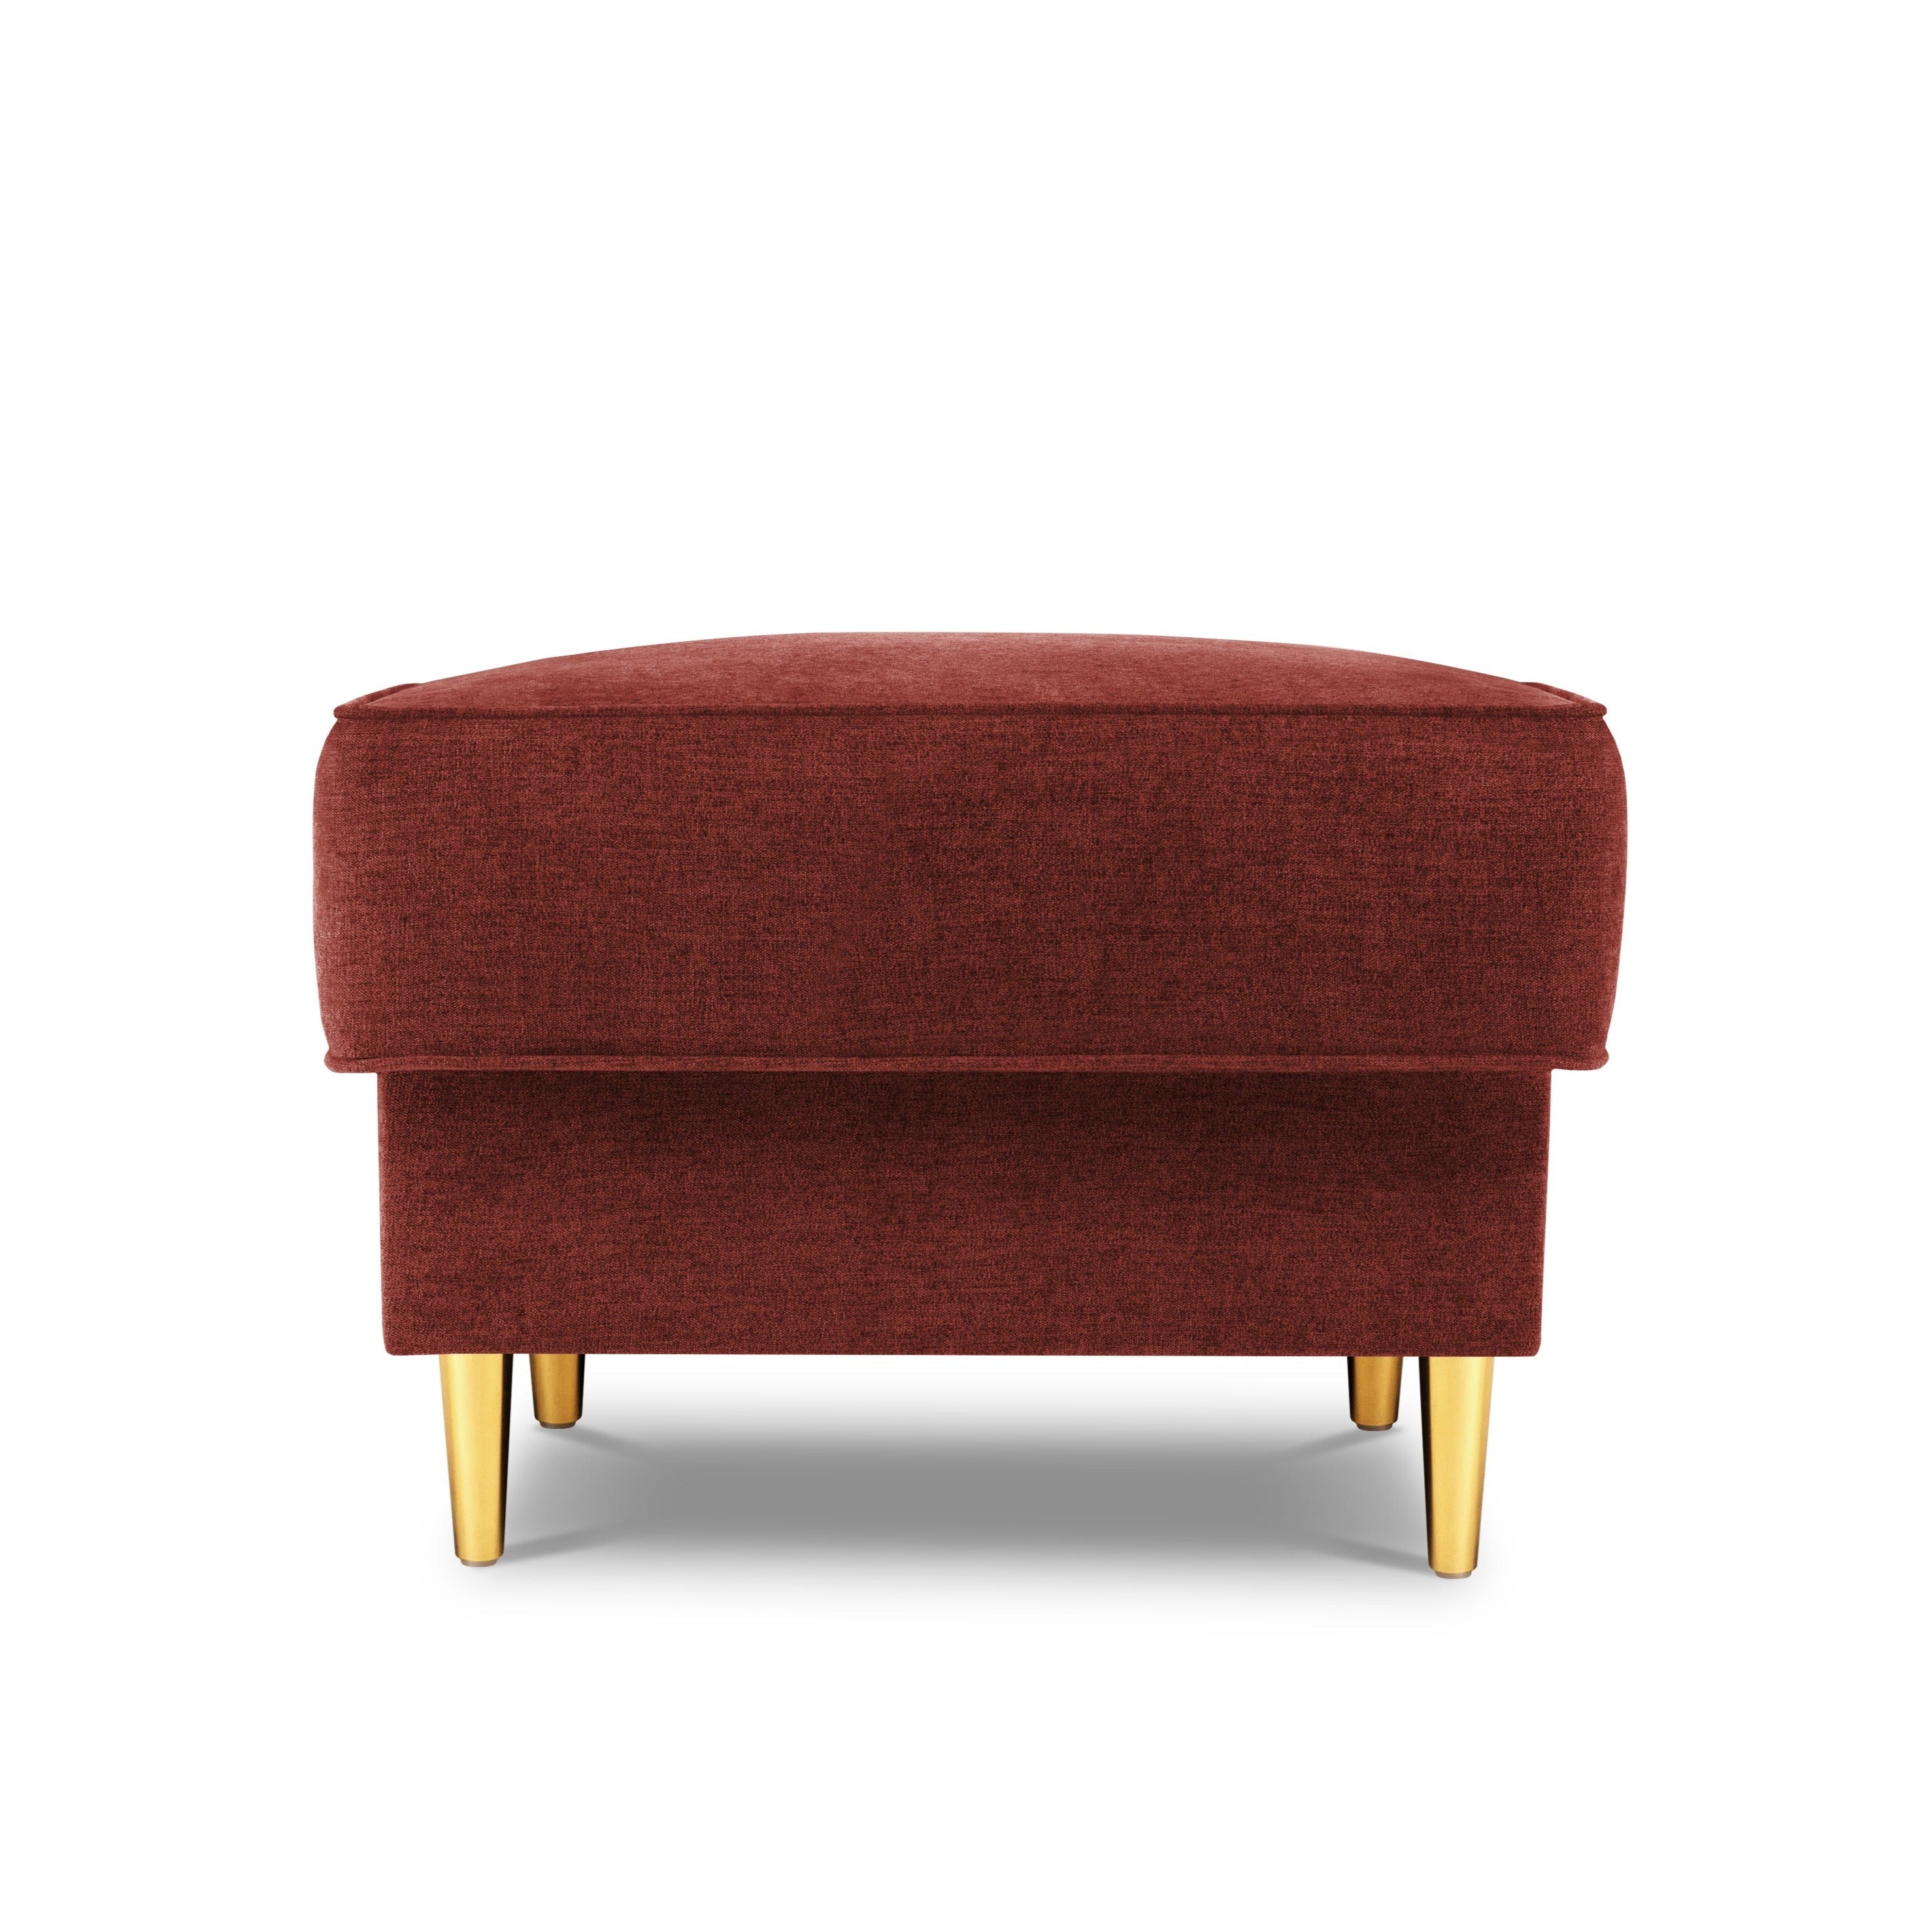 burgundy pouf with a golden finish